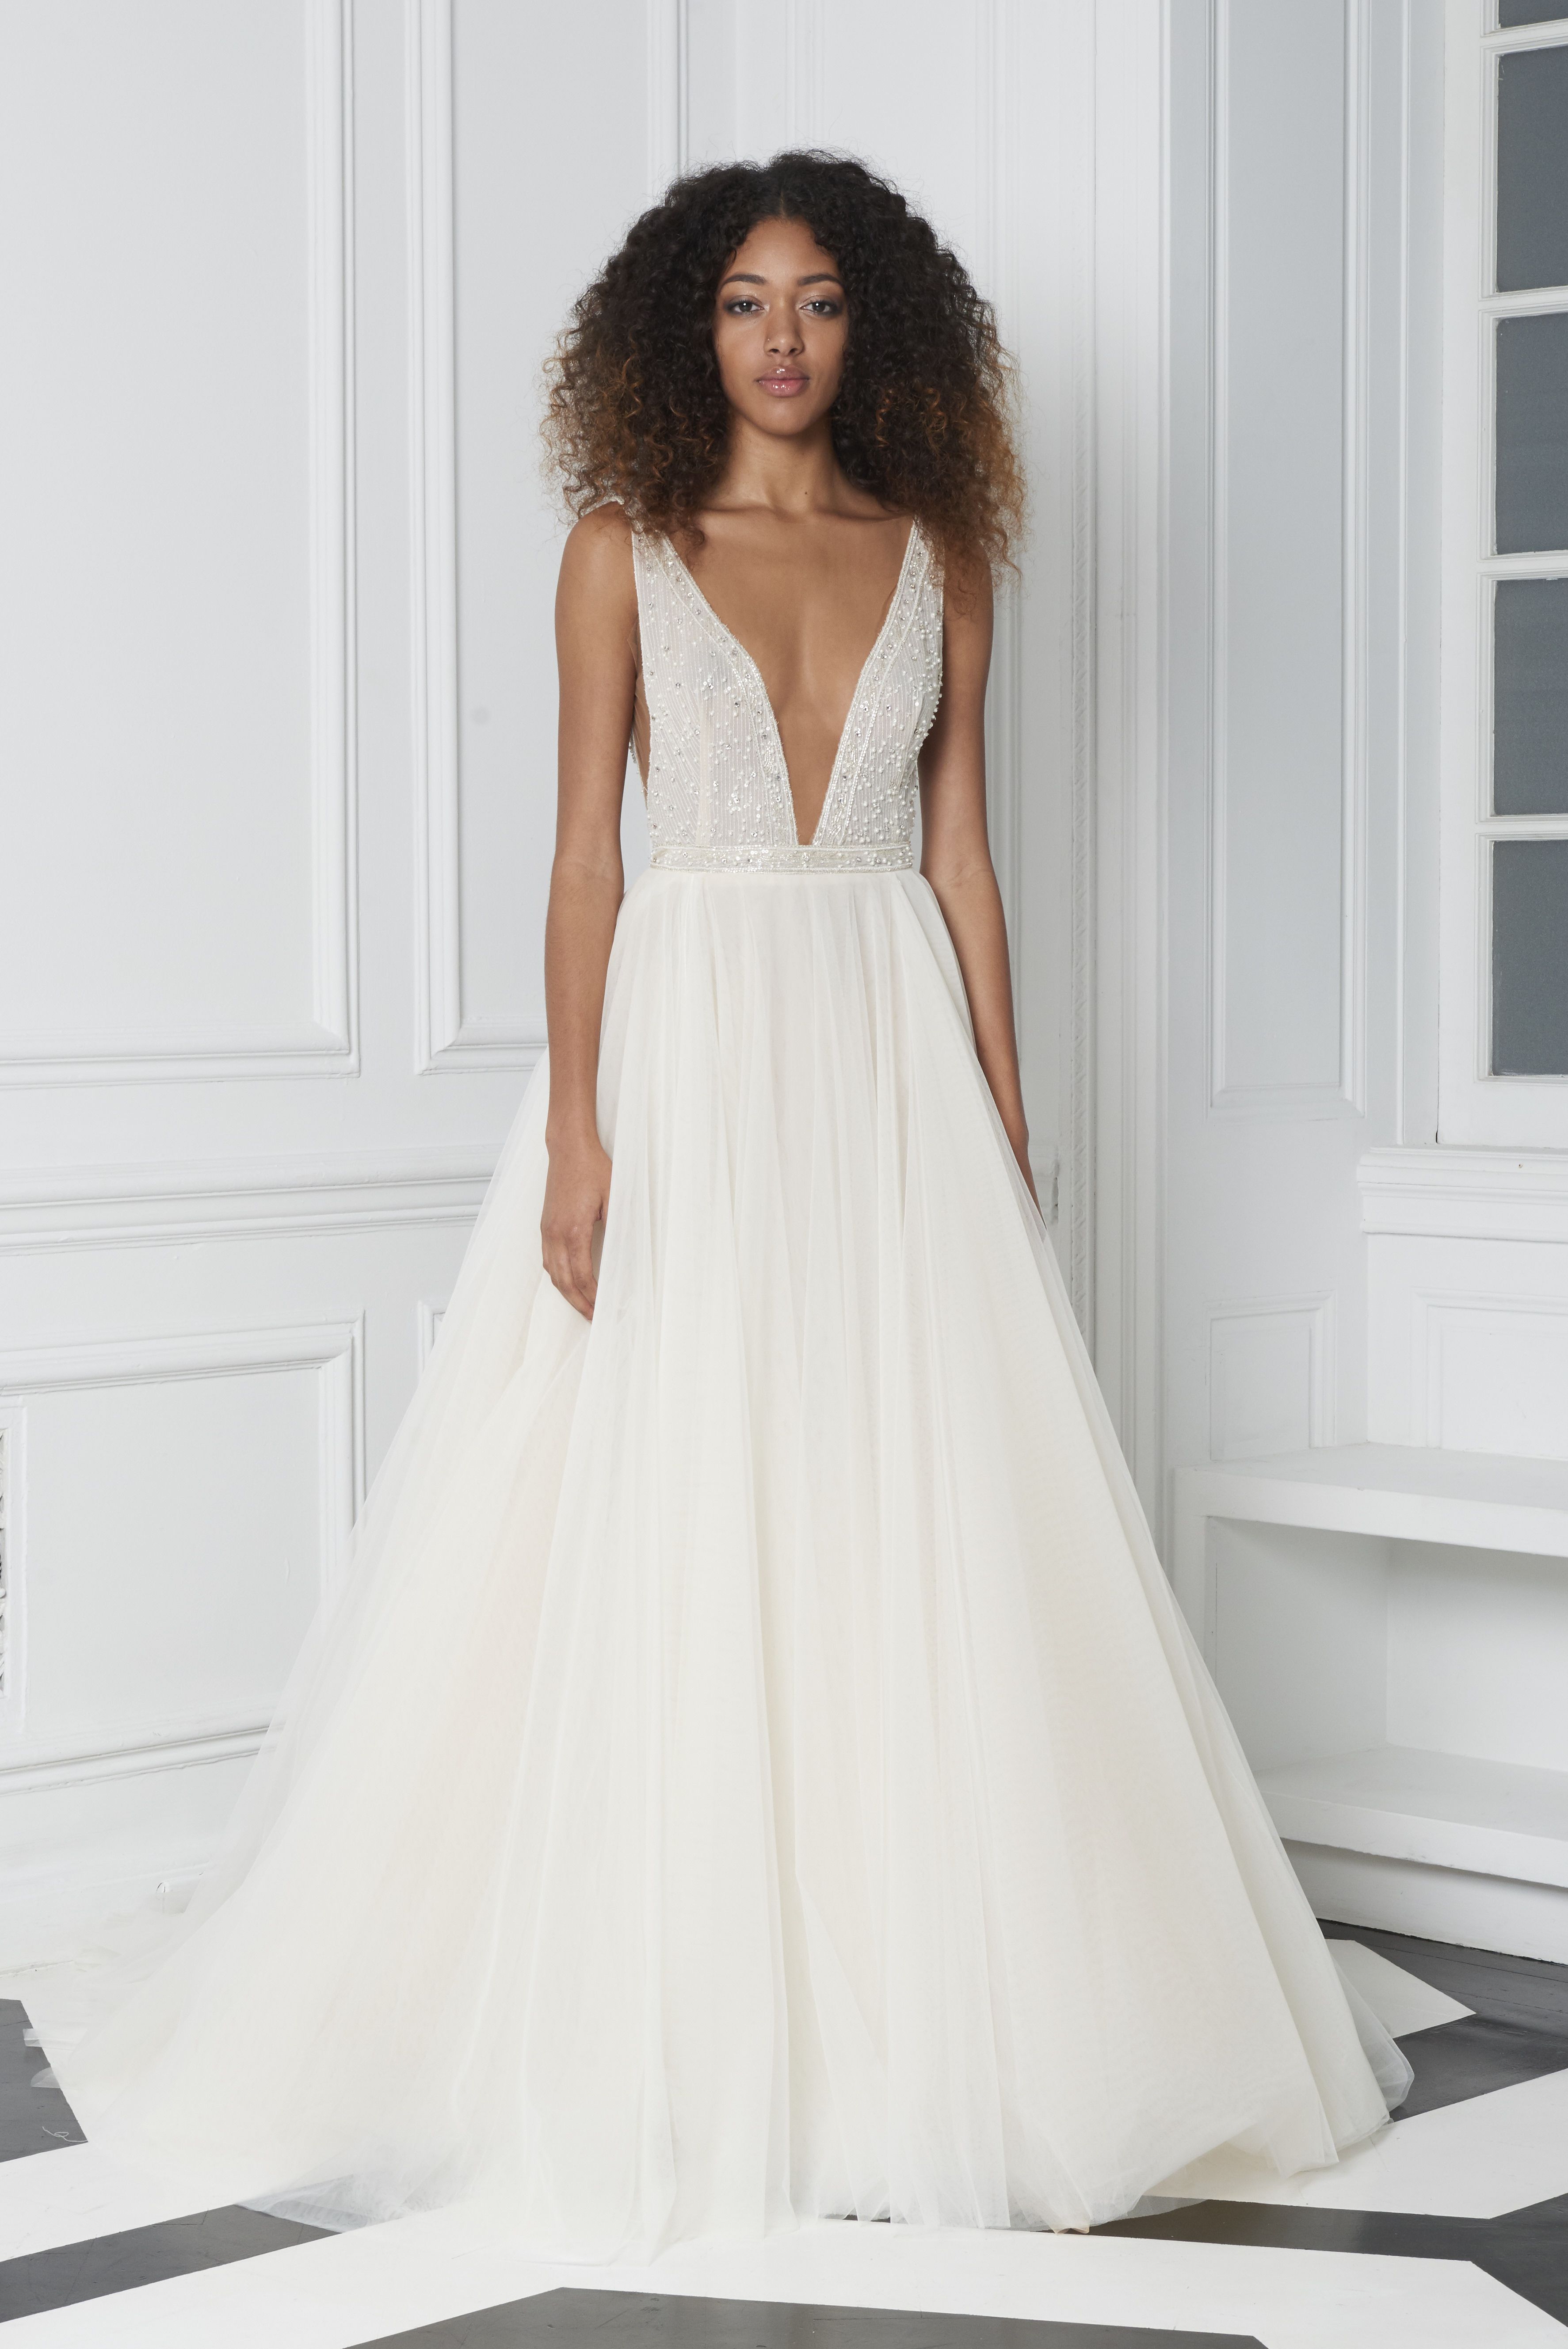 25 Simple Wedding Dresses From Fall ...